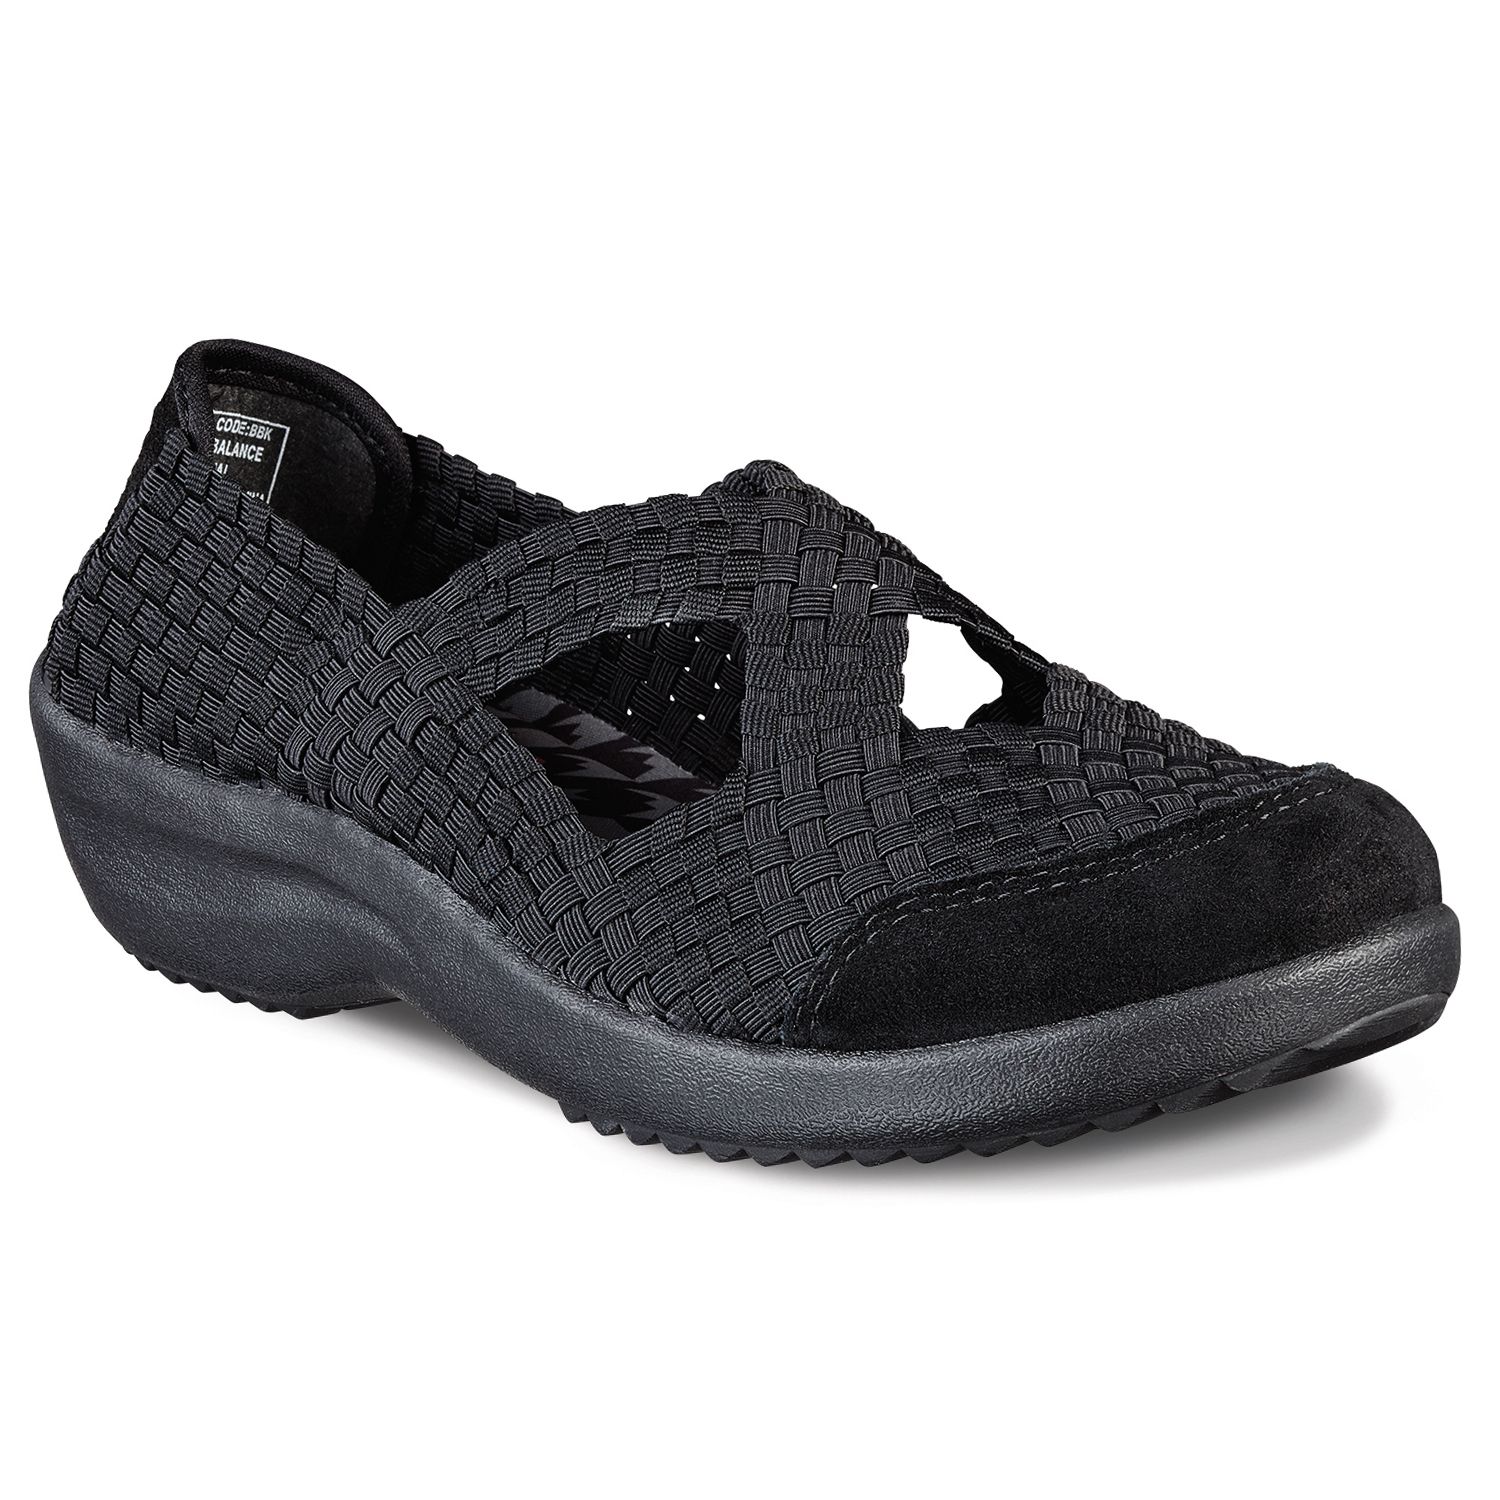 skechers relaxed fit savor entice memory foam woven sandals